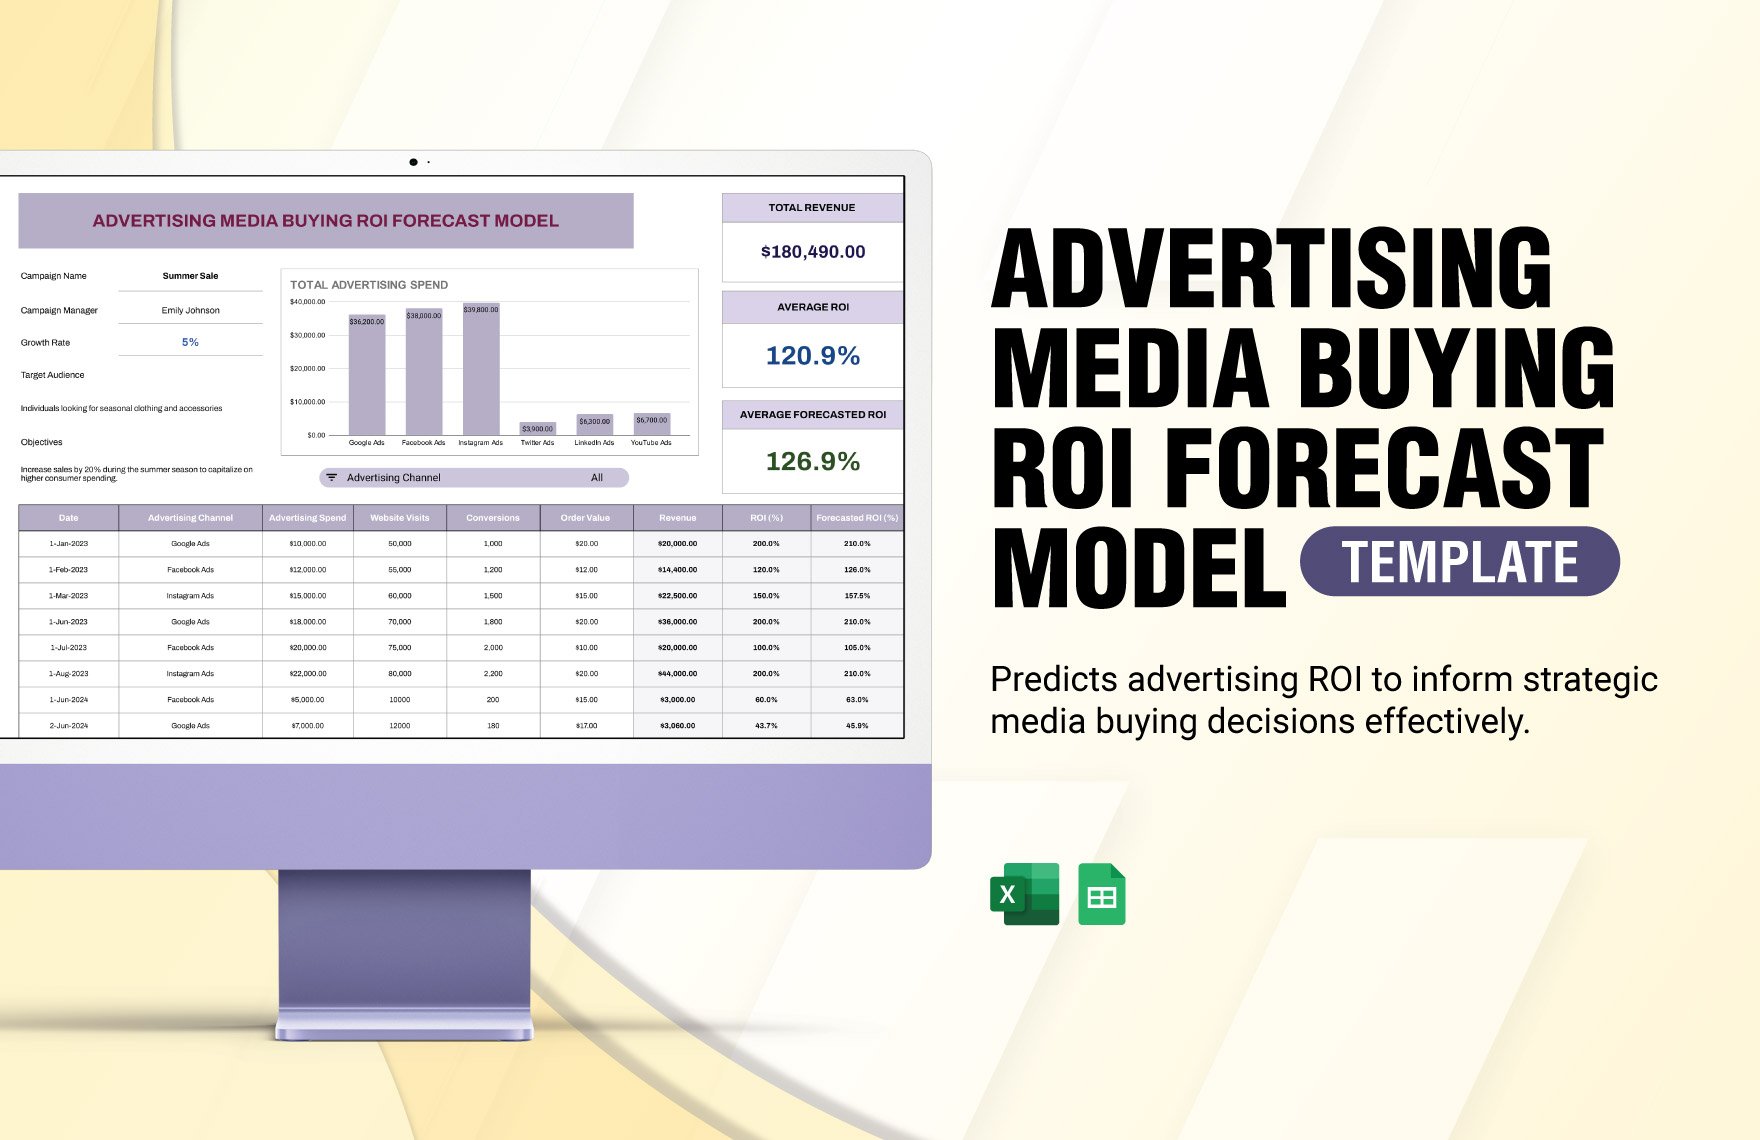 Advertising Media Buying ROI Forecast Model Template in Excel, Google Sheets